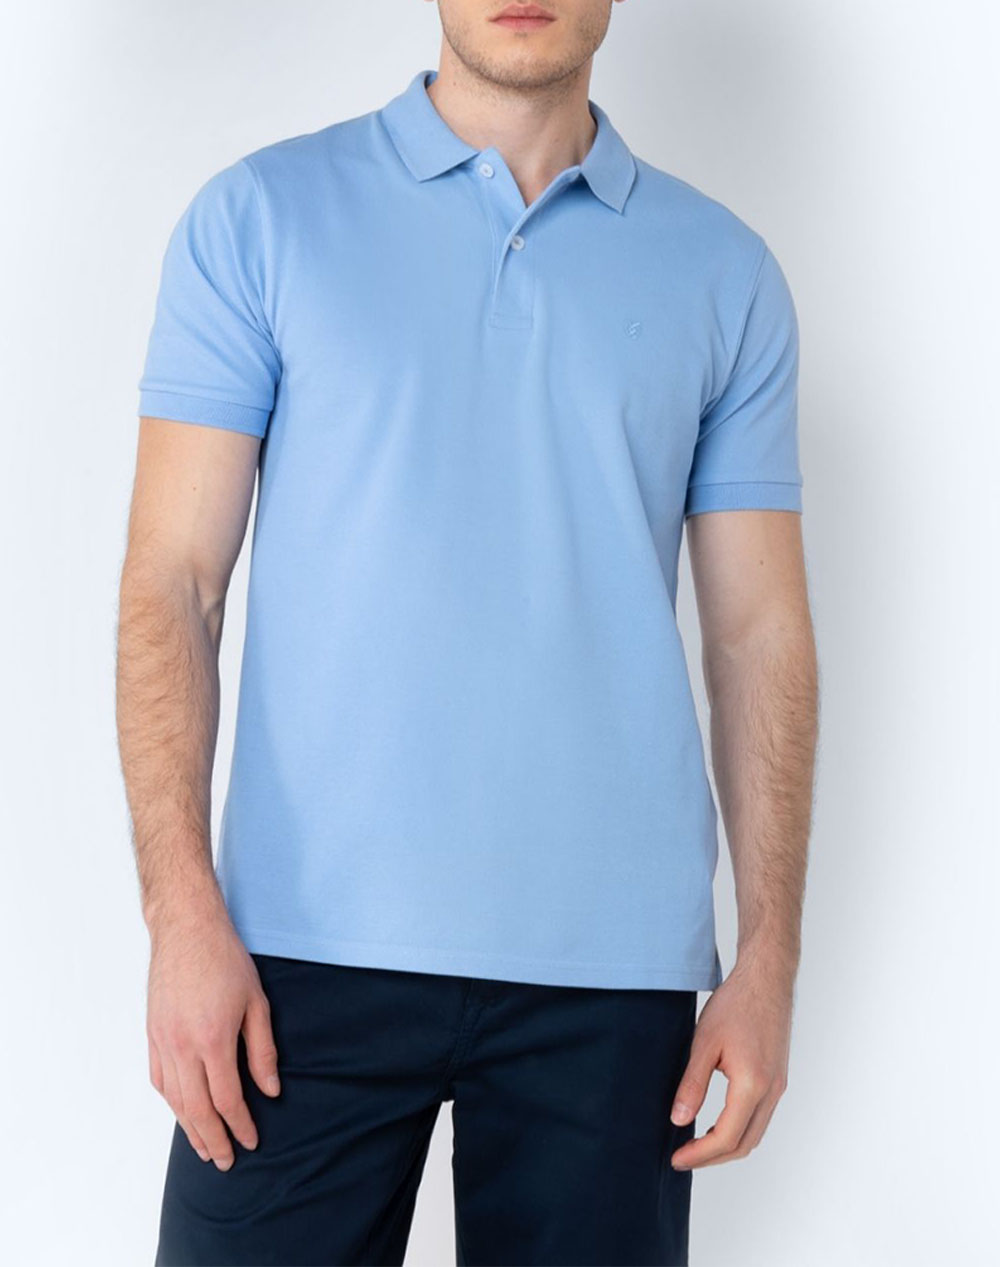 THE BOSTONIANS ΜΠΛΟΥΖΑ POLO PIQUE REGULAR FIT 3PS0001-SKY SteelBlue